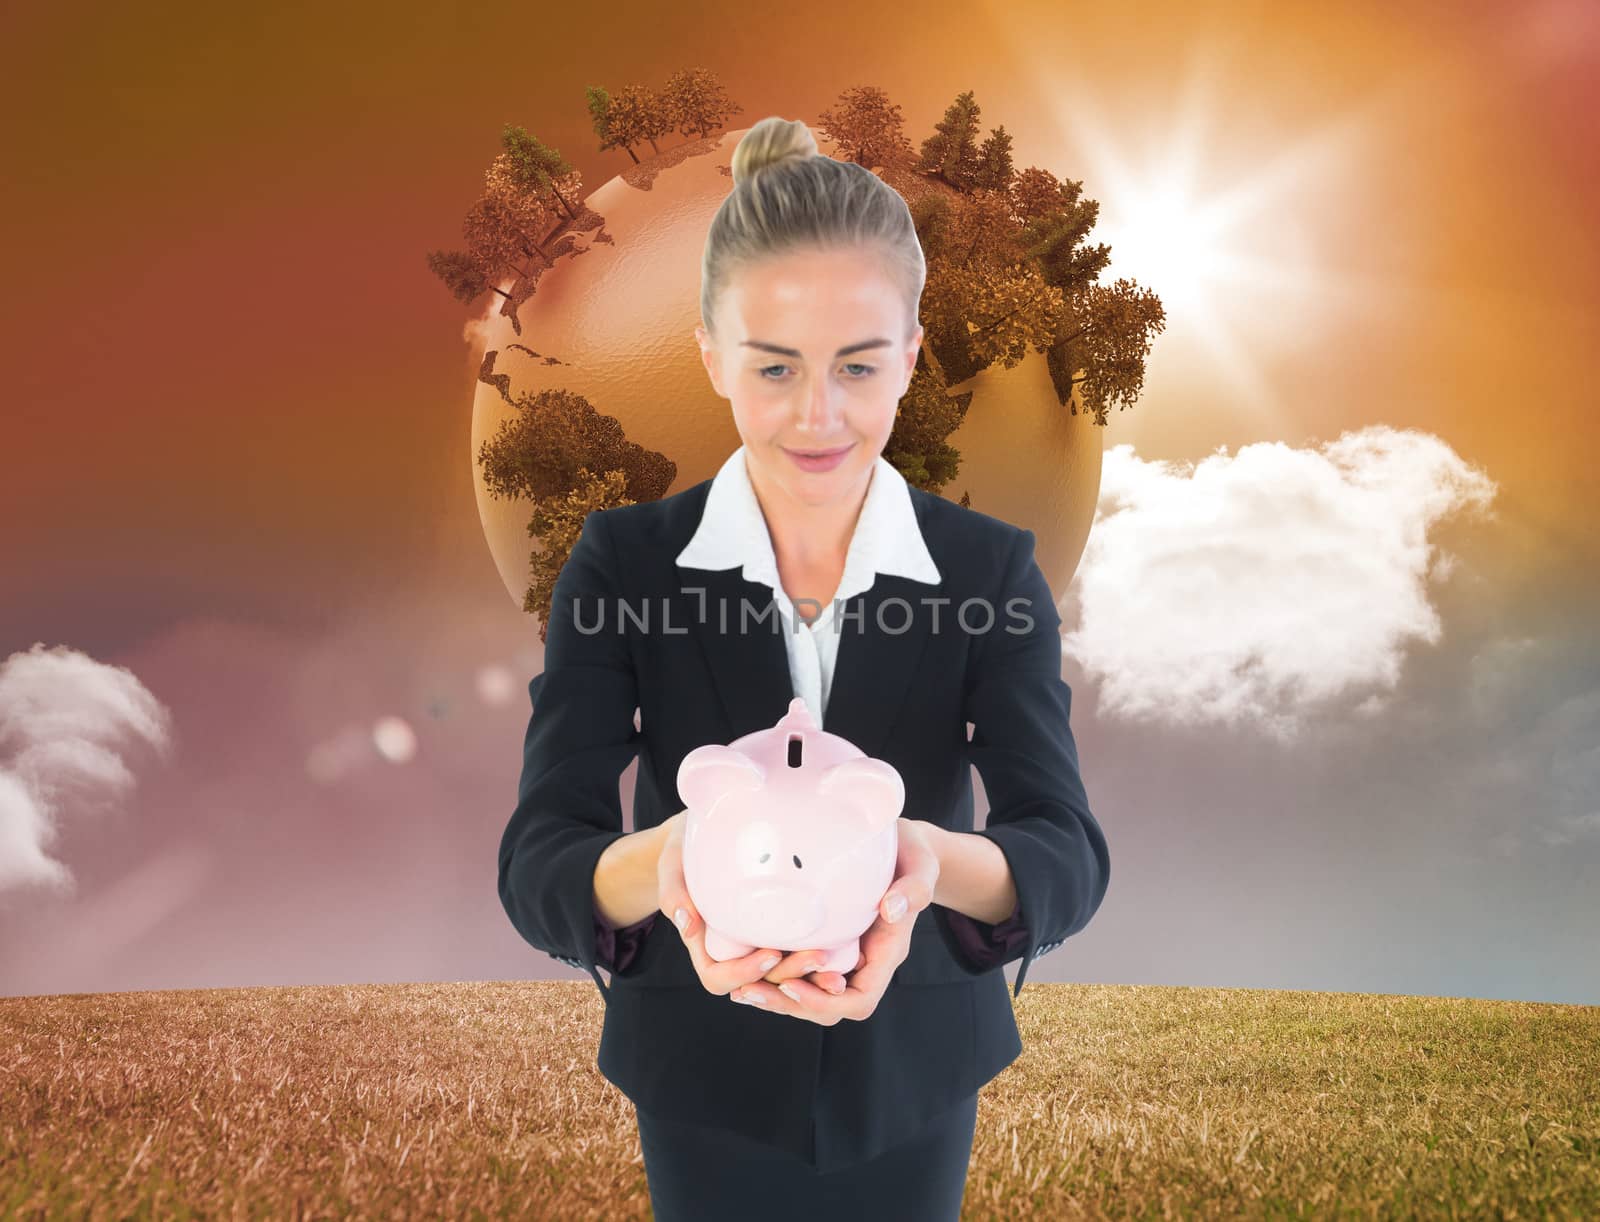 Composite image of businesswoman holding pink piggy bank by Wavebreakmedia